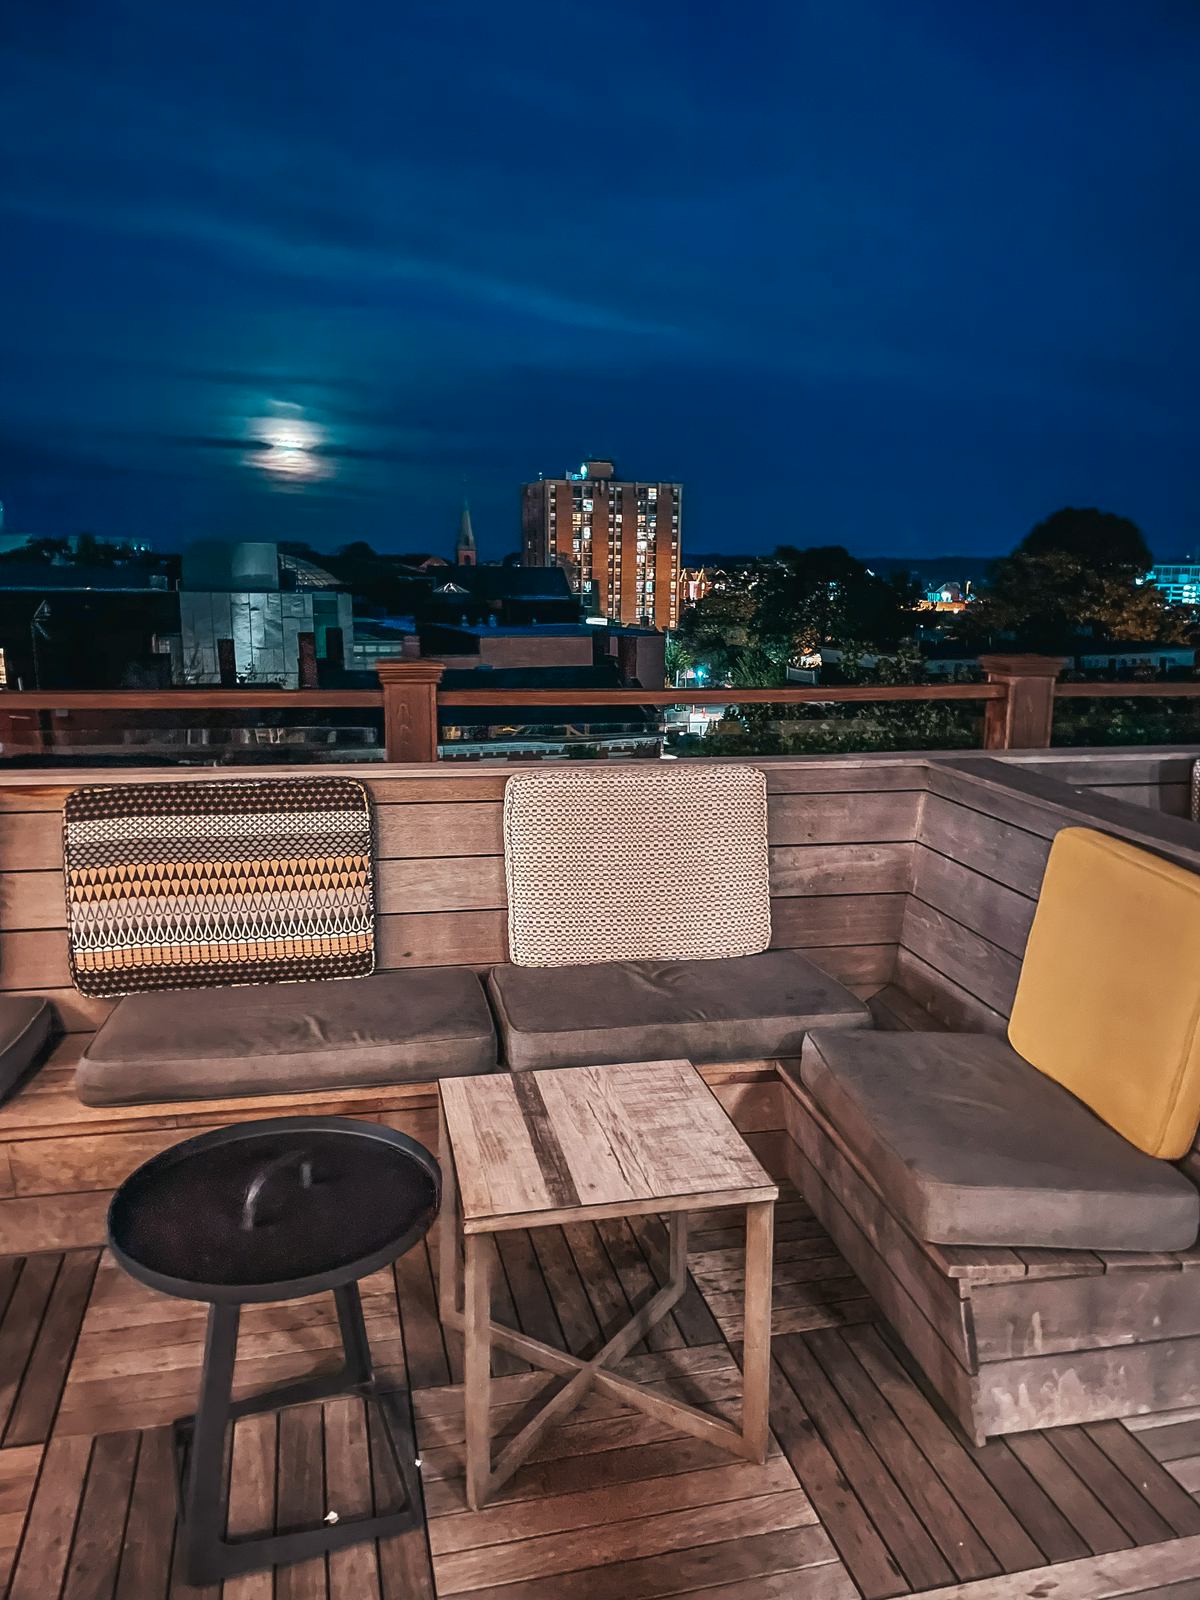 Full moon sighting from The Roof restaurant in Salem